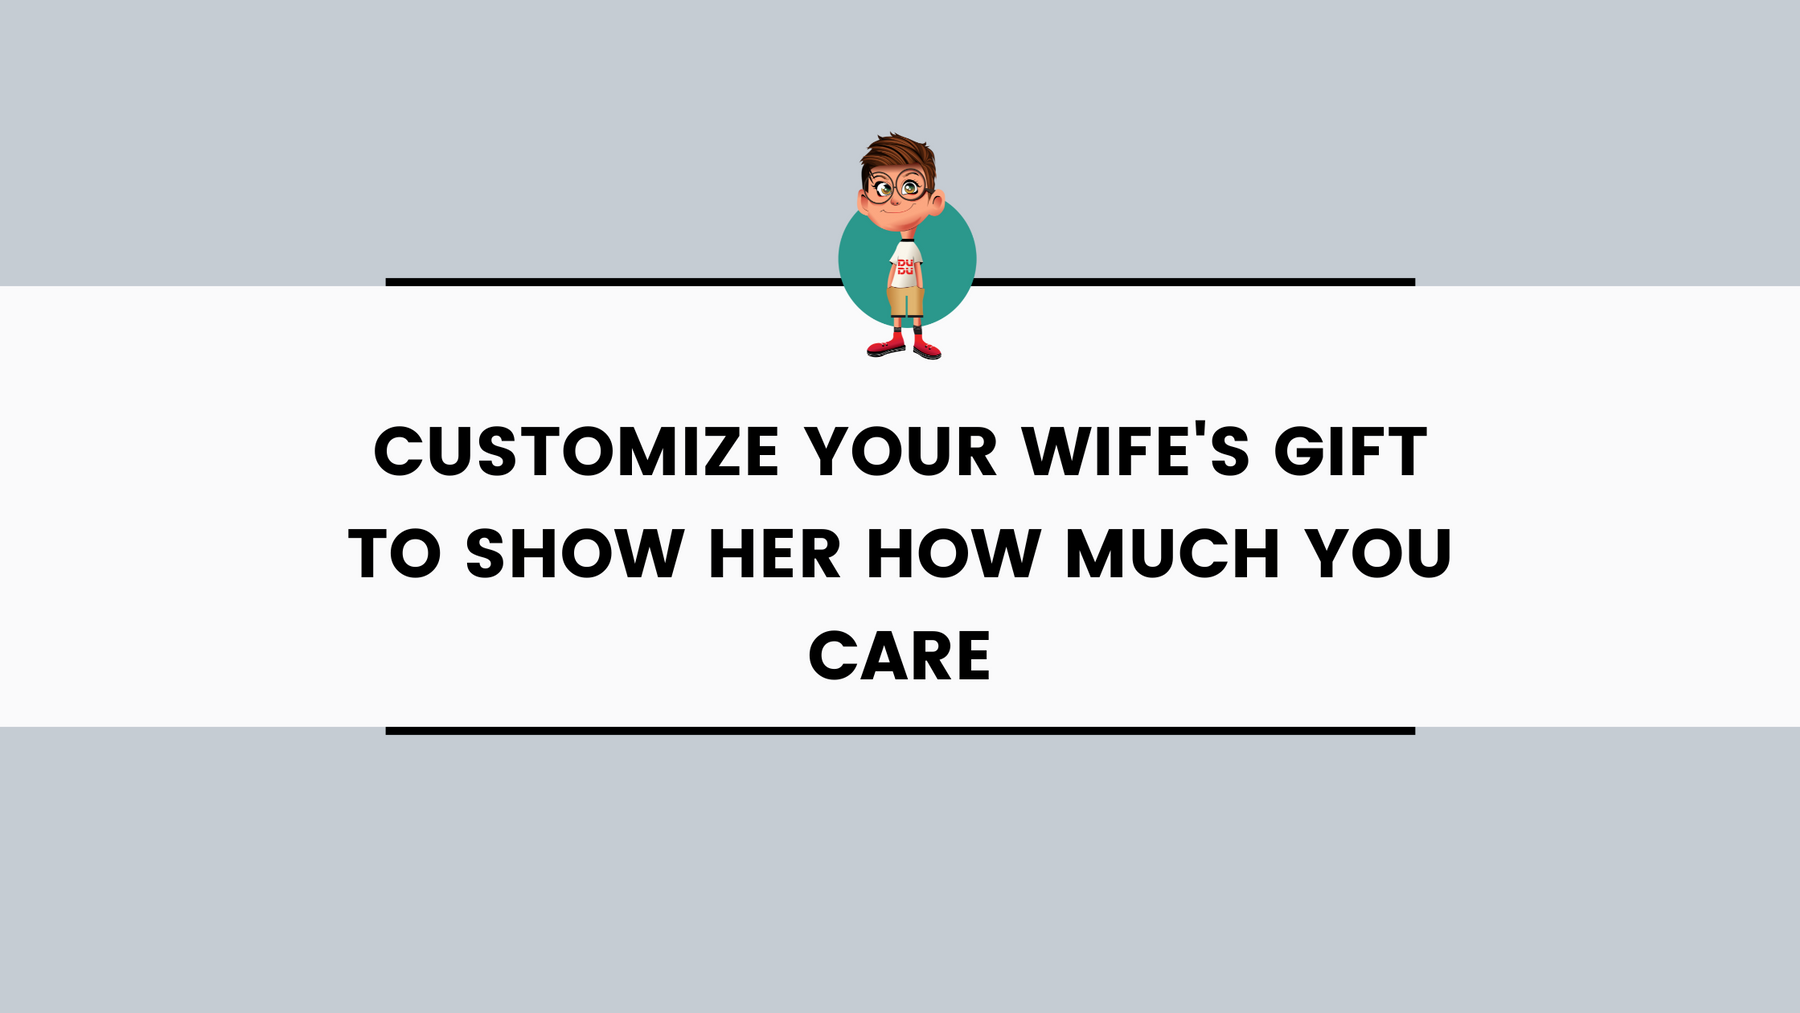 Customize Your Wife's Gift to Show Her How Much You Care